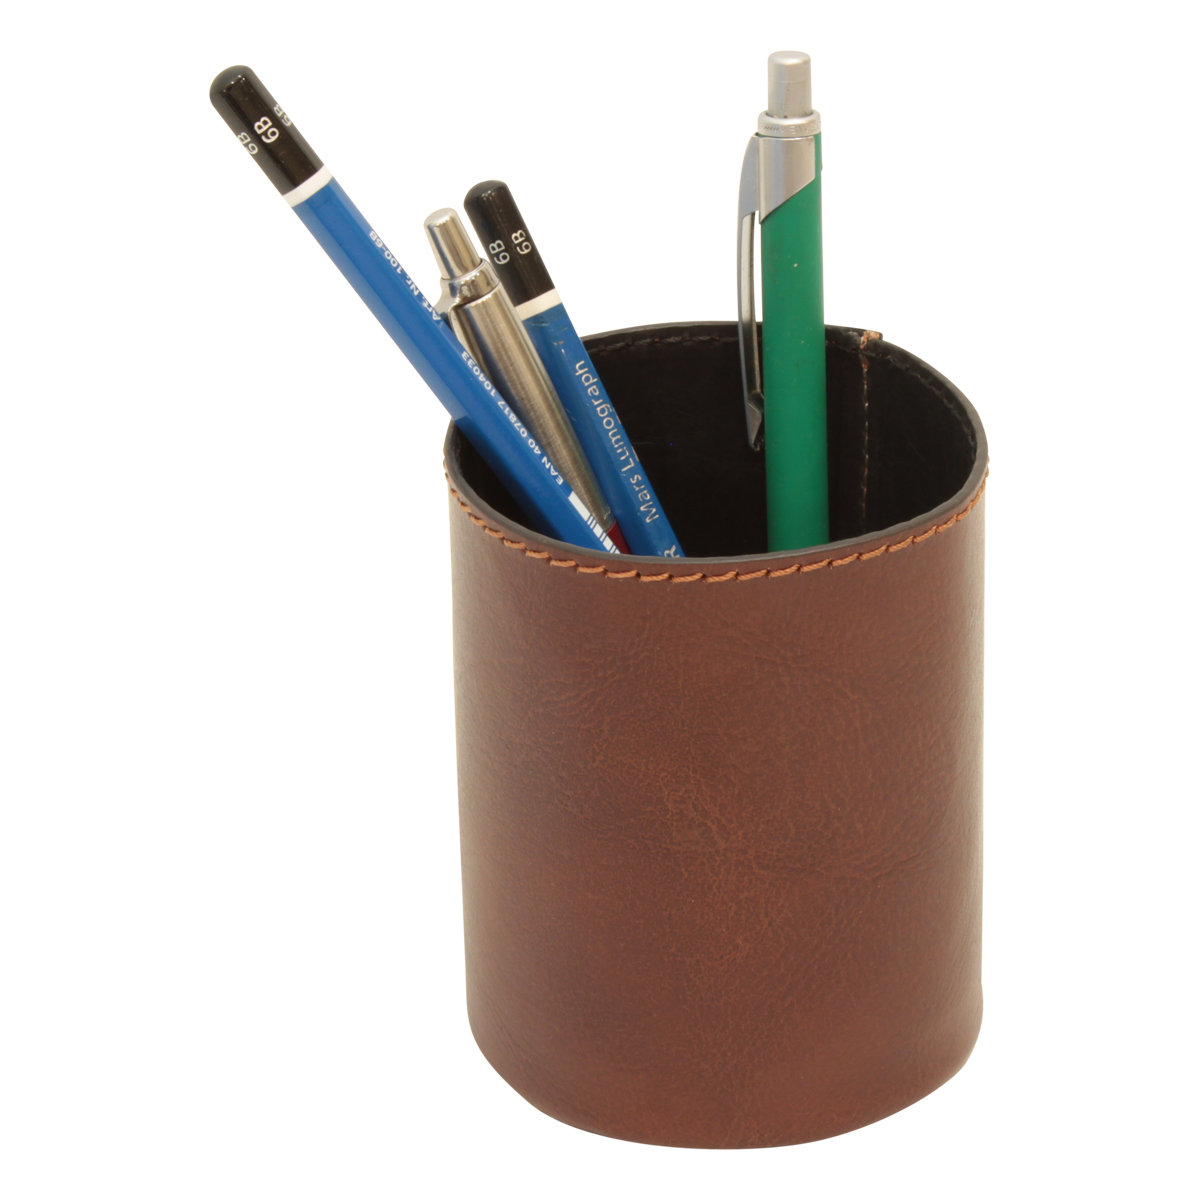 Leather pen cup | 763089MA | EURO | Old Angler Firenze